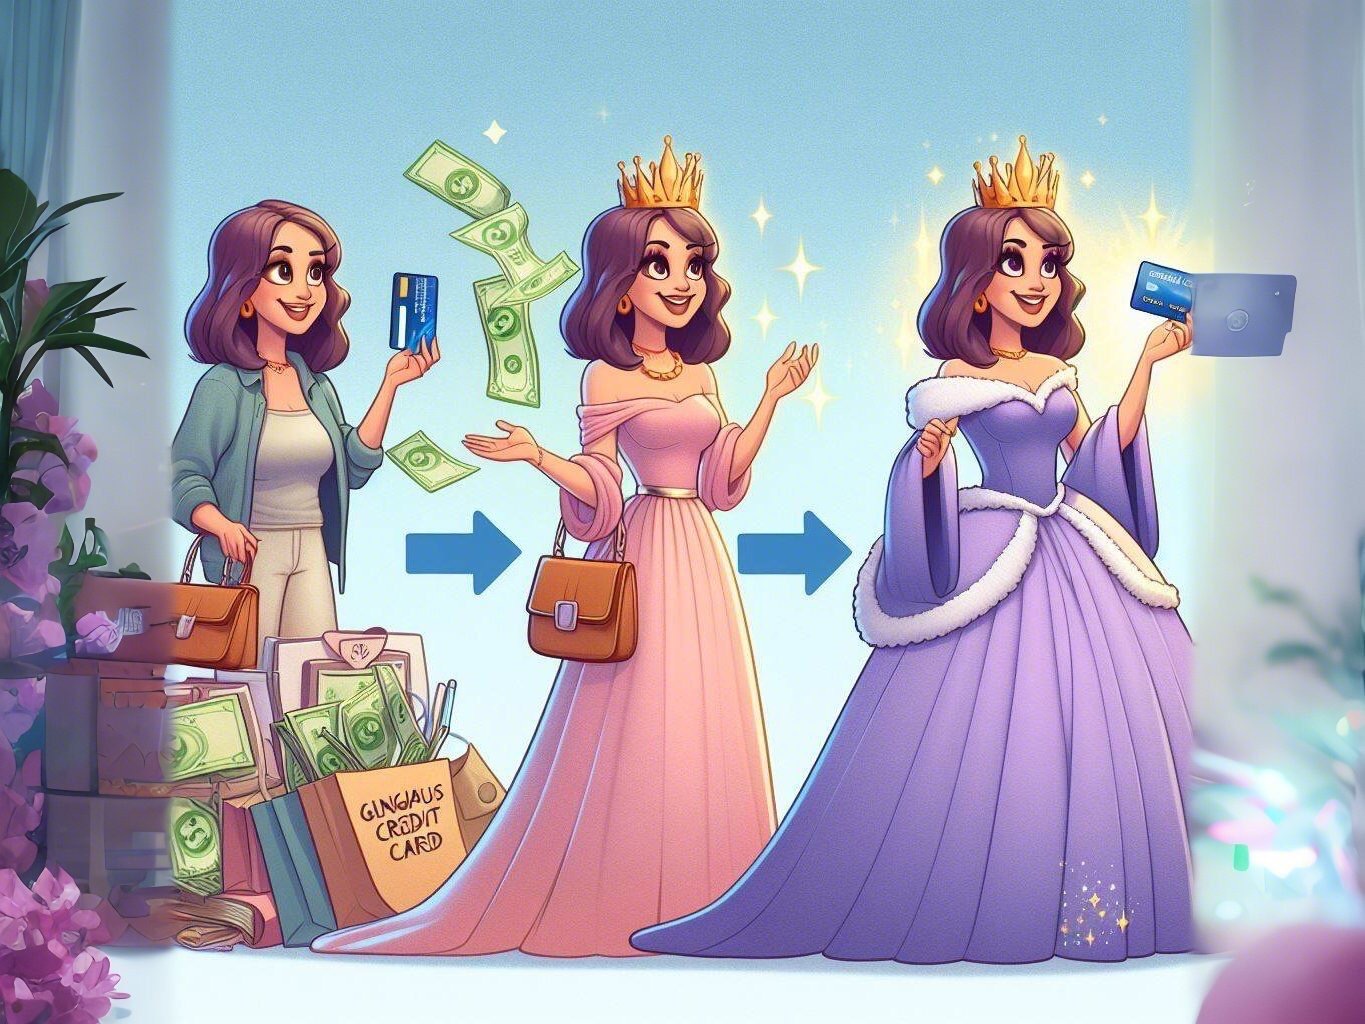 Magic Credit Card,Shopaholic Princess, Wealth, Redemption, Materialism, tale